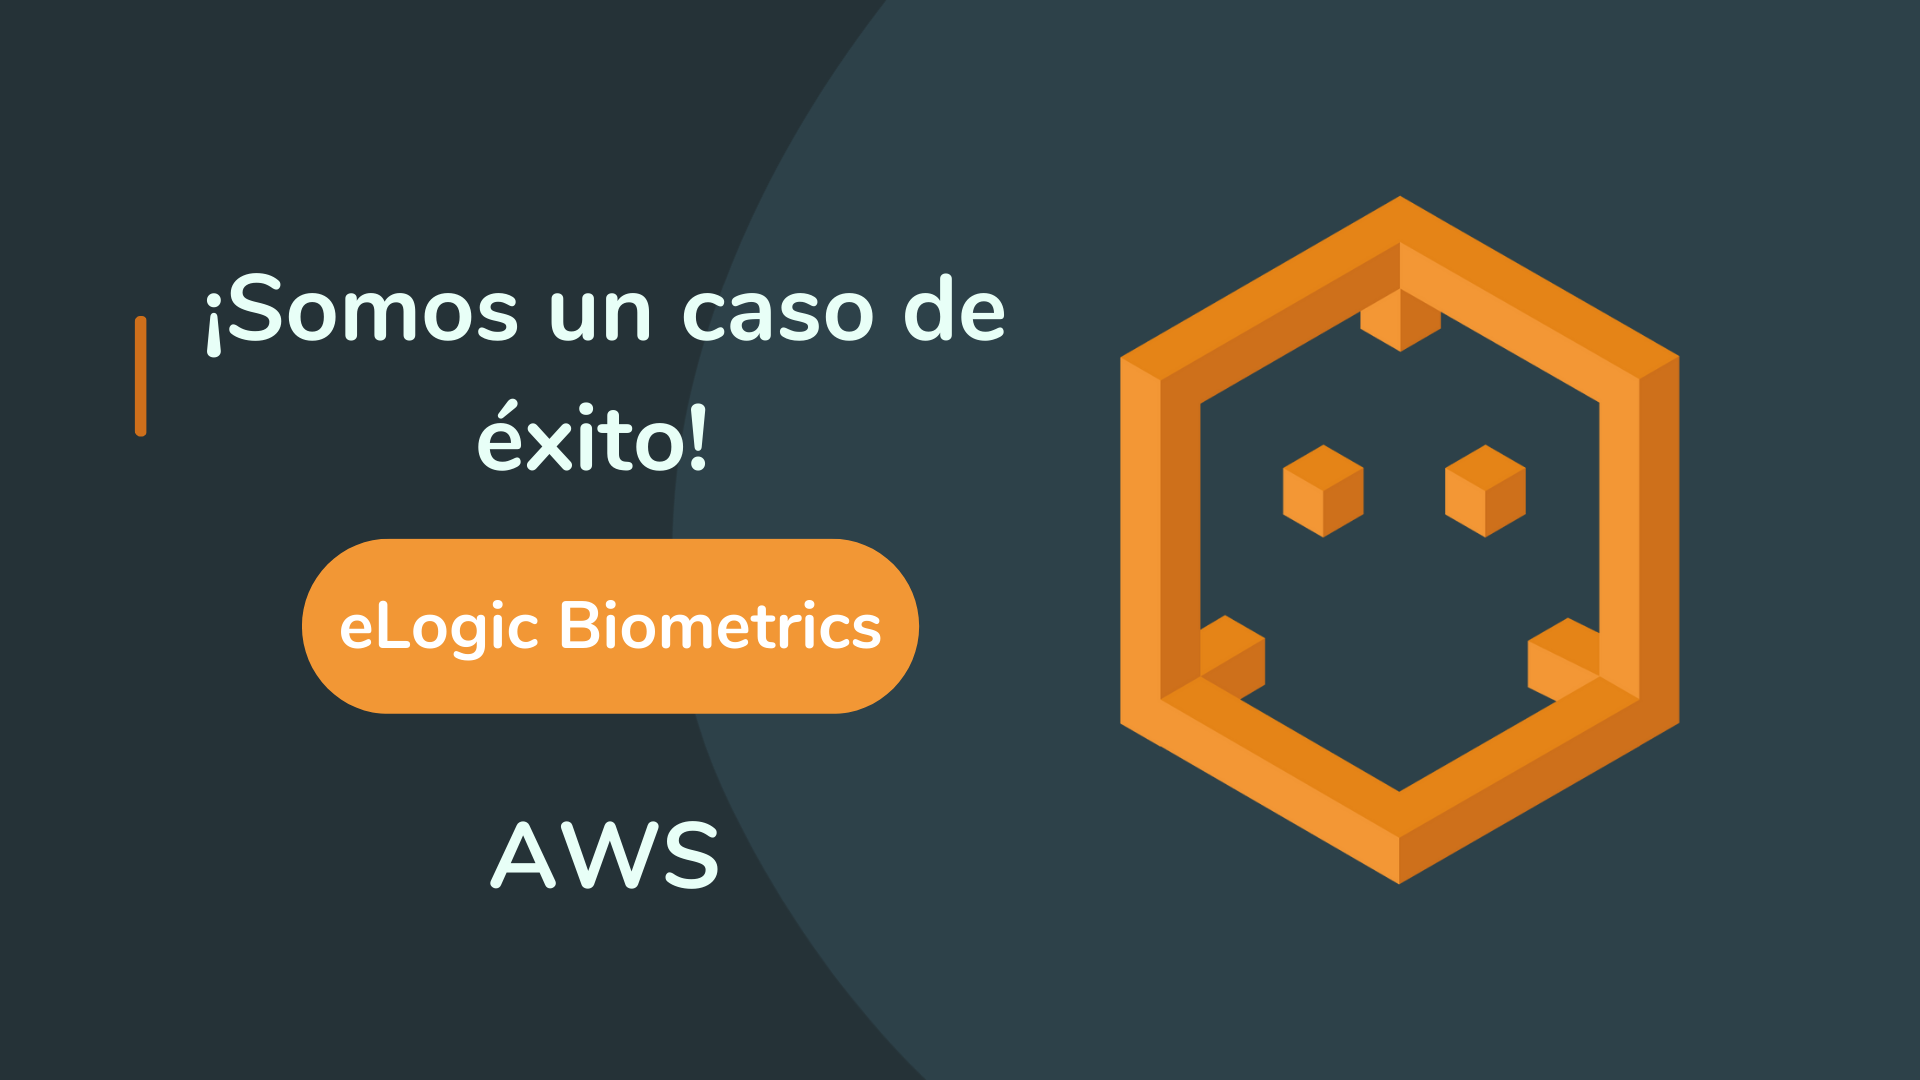 eLogic Biometrics is a solution efficient of check biometric and documentary film supported in Amazon Web Services (AWS)